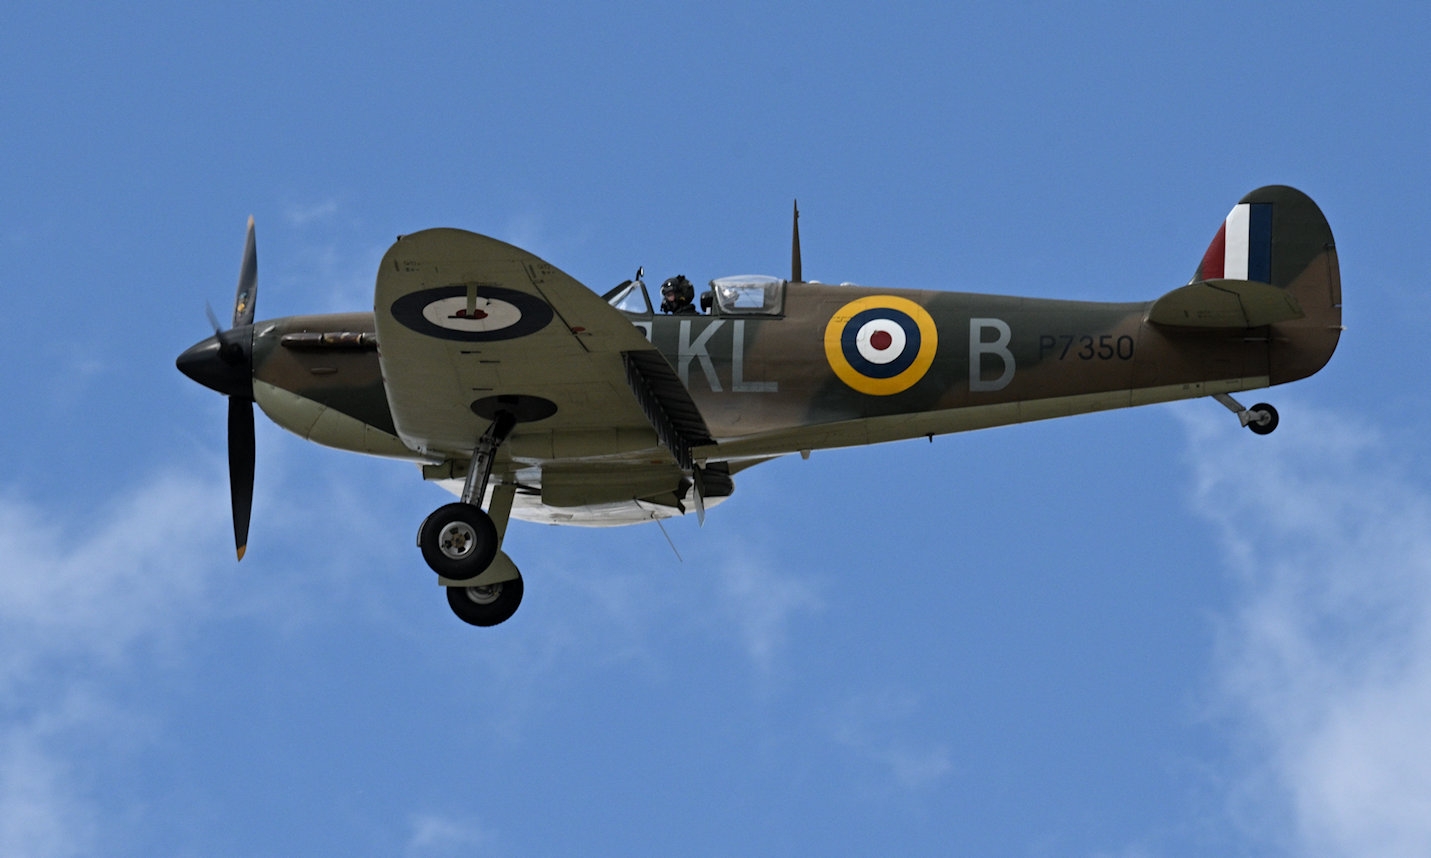 Taken on the BBMF visit to Southend 21/08/22